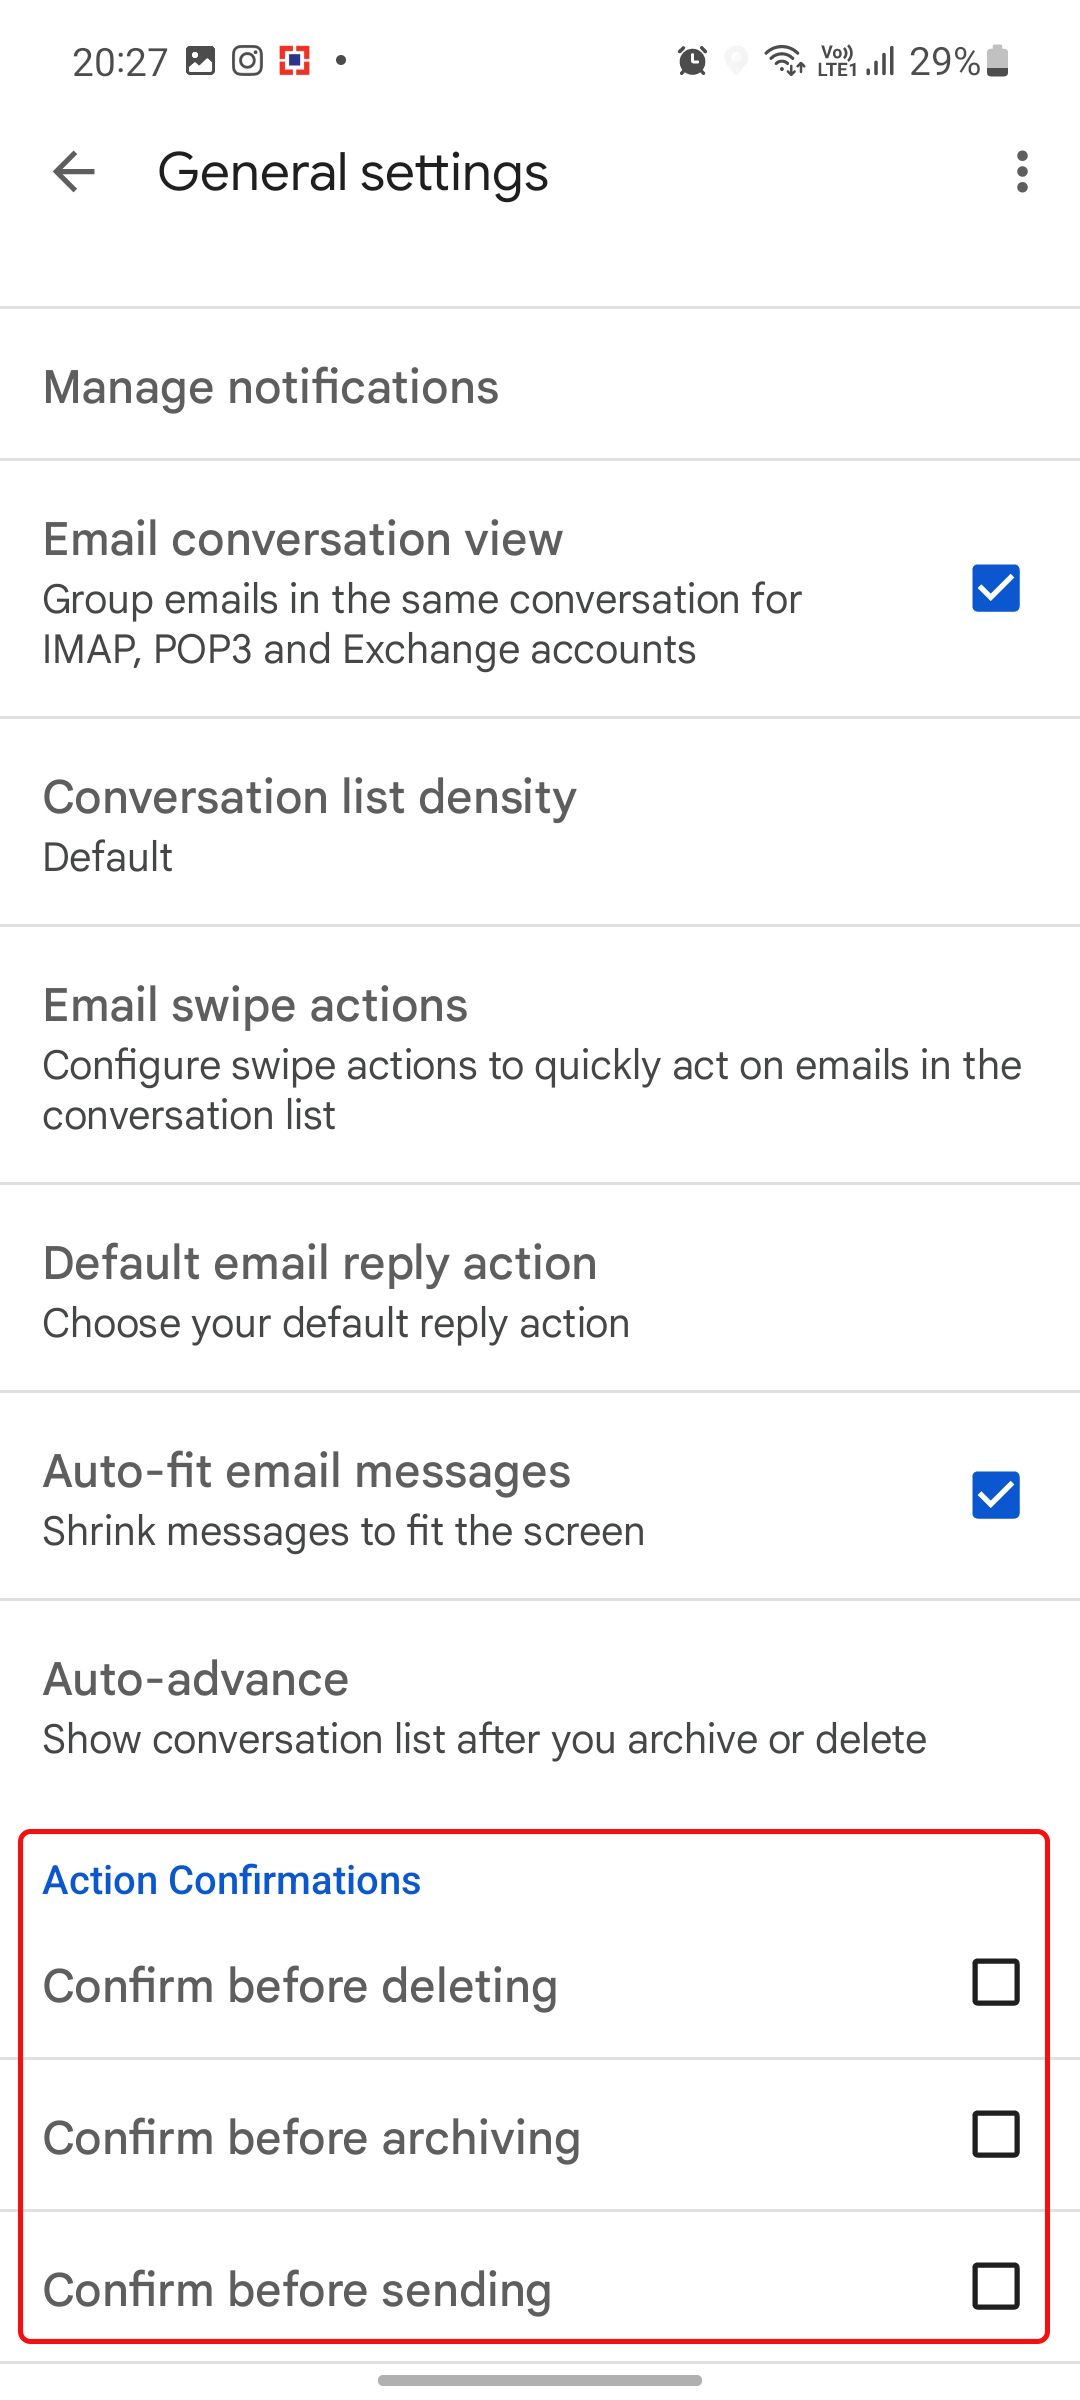 The available Gmail action confirmations for deleting, archiving, and sending messages.